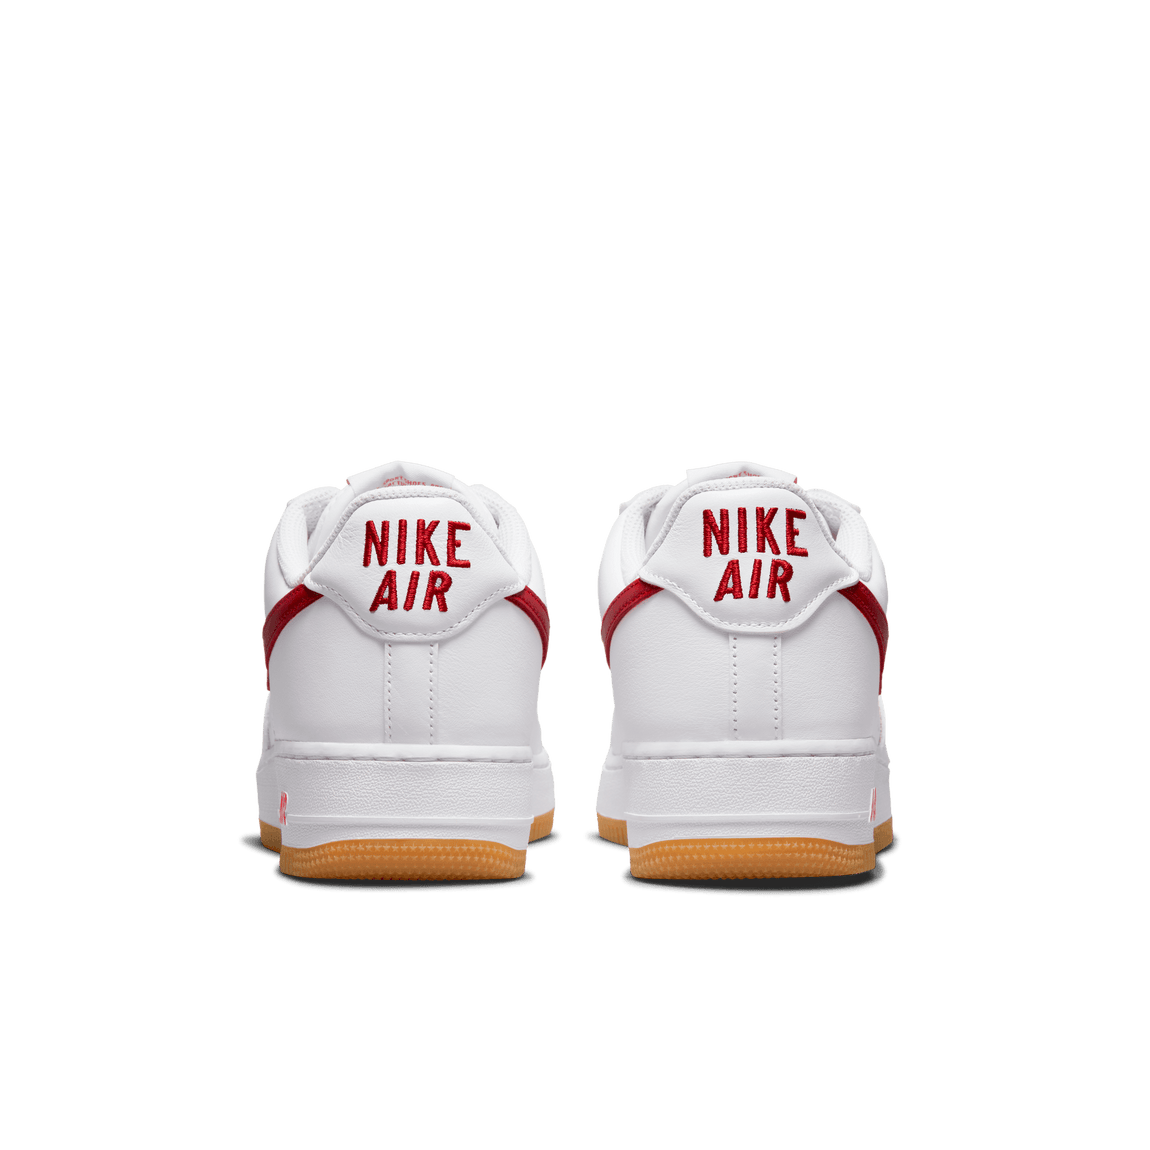 Nike Air Force 1 Low Retro (White/University Red/Gum-Yellow) - Nike Air Force 1 Low Retro (White/University Red/Gum-Yellow) - 